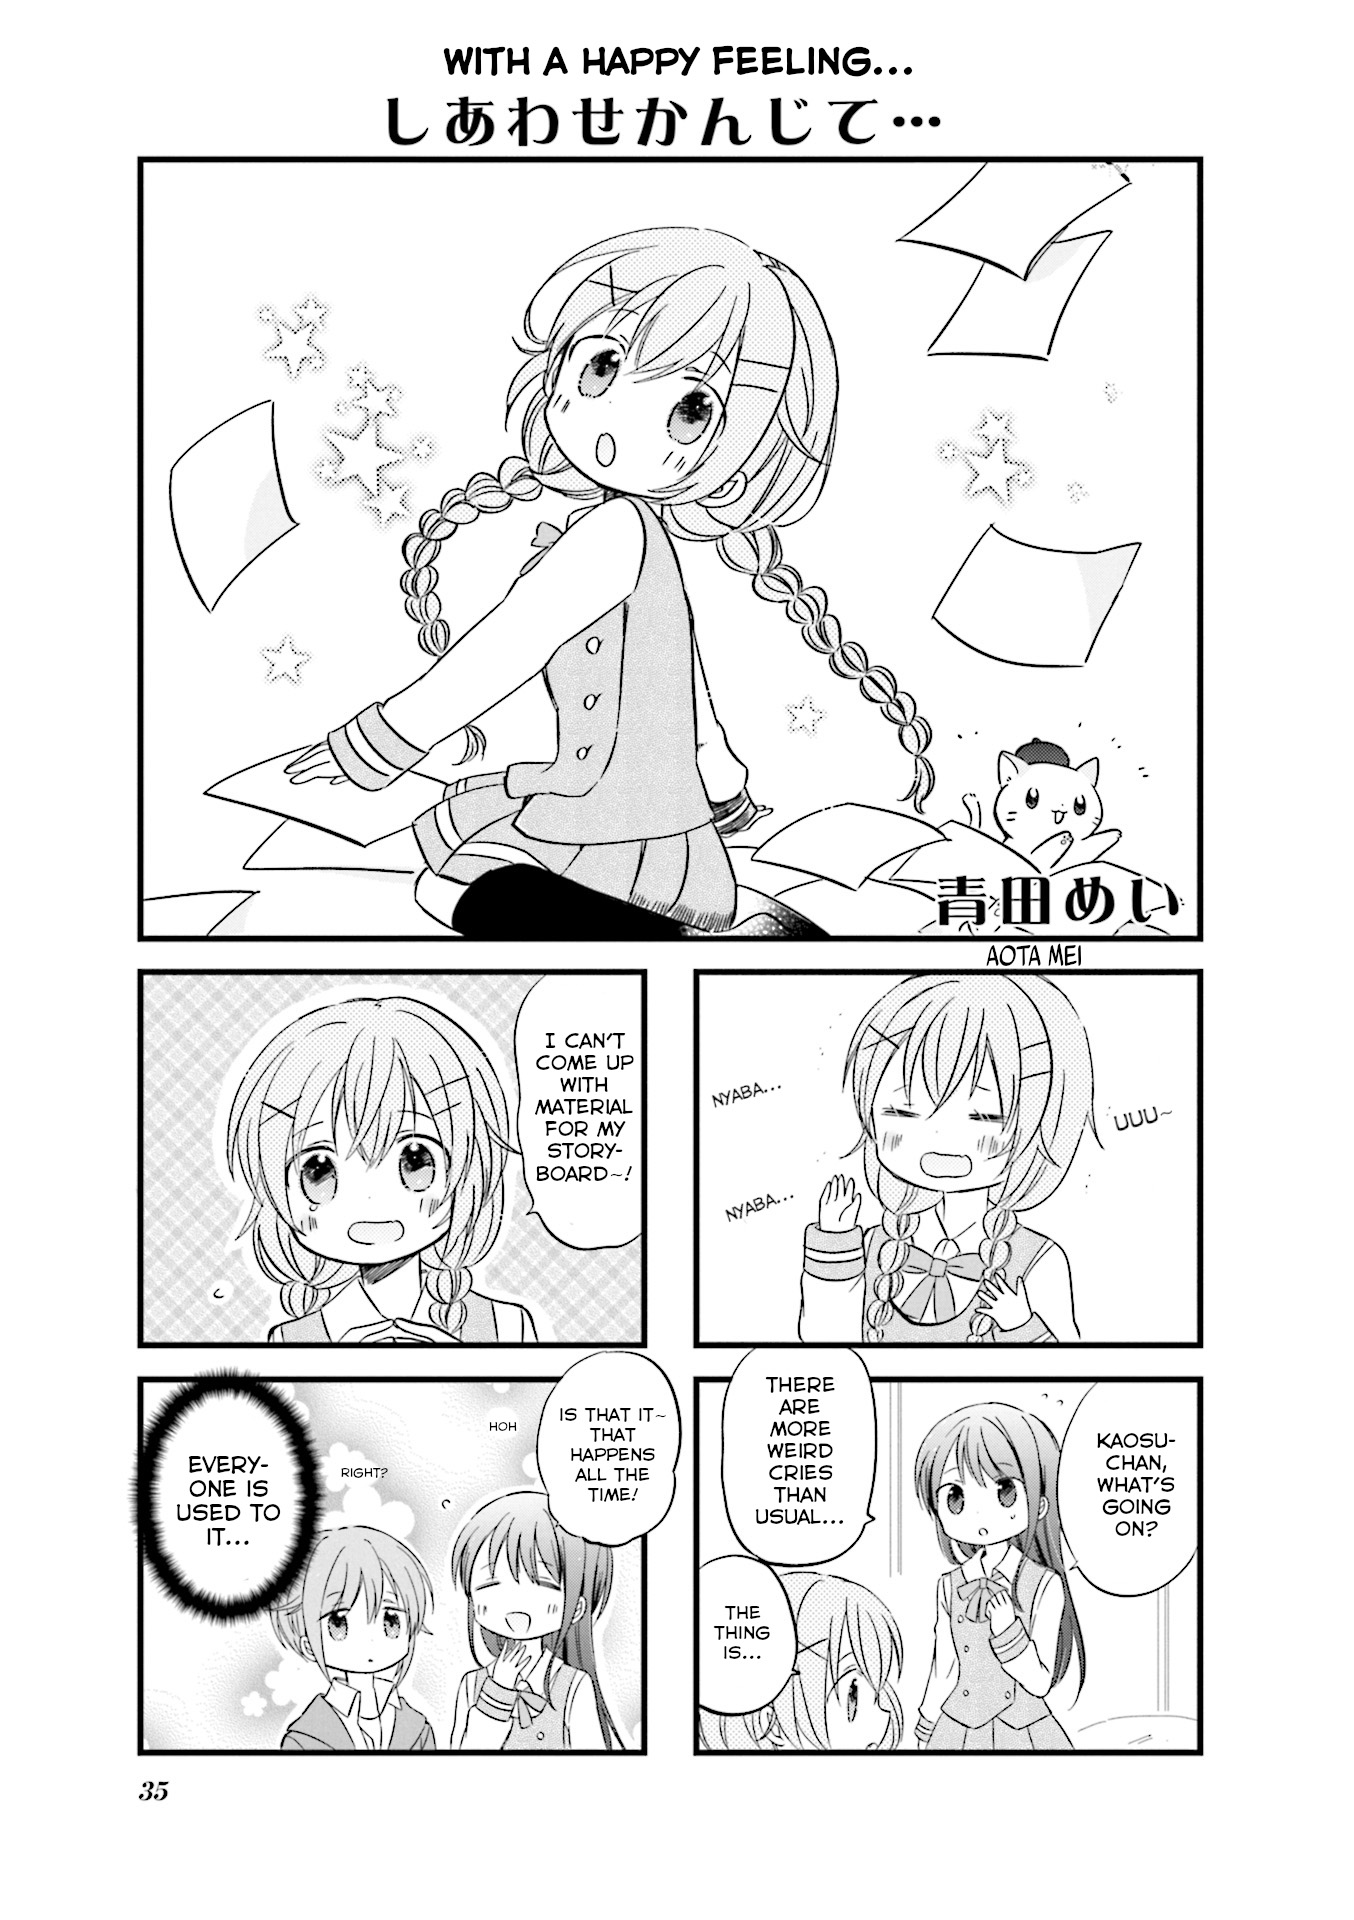 Comic Girls Anthology Vol.1 Chapter 4: With A Happy Feeling... - Picture 1